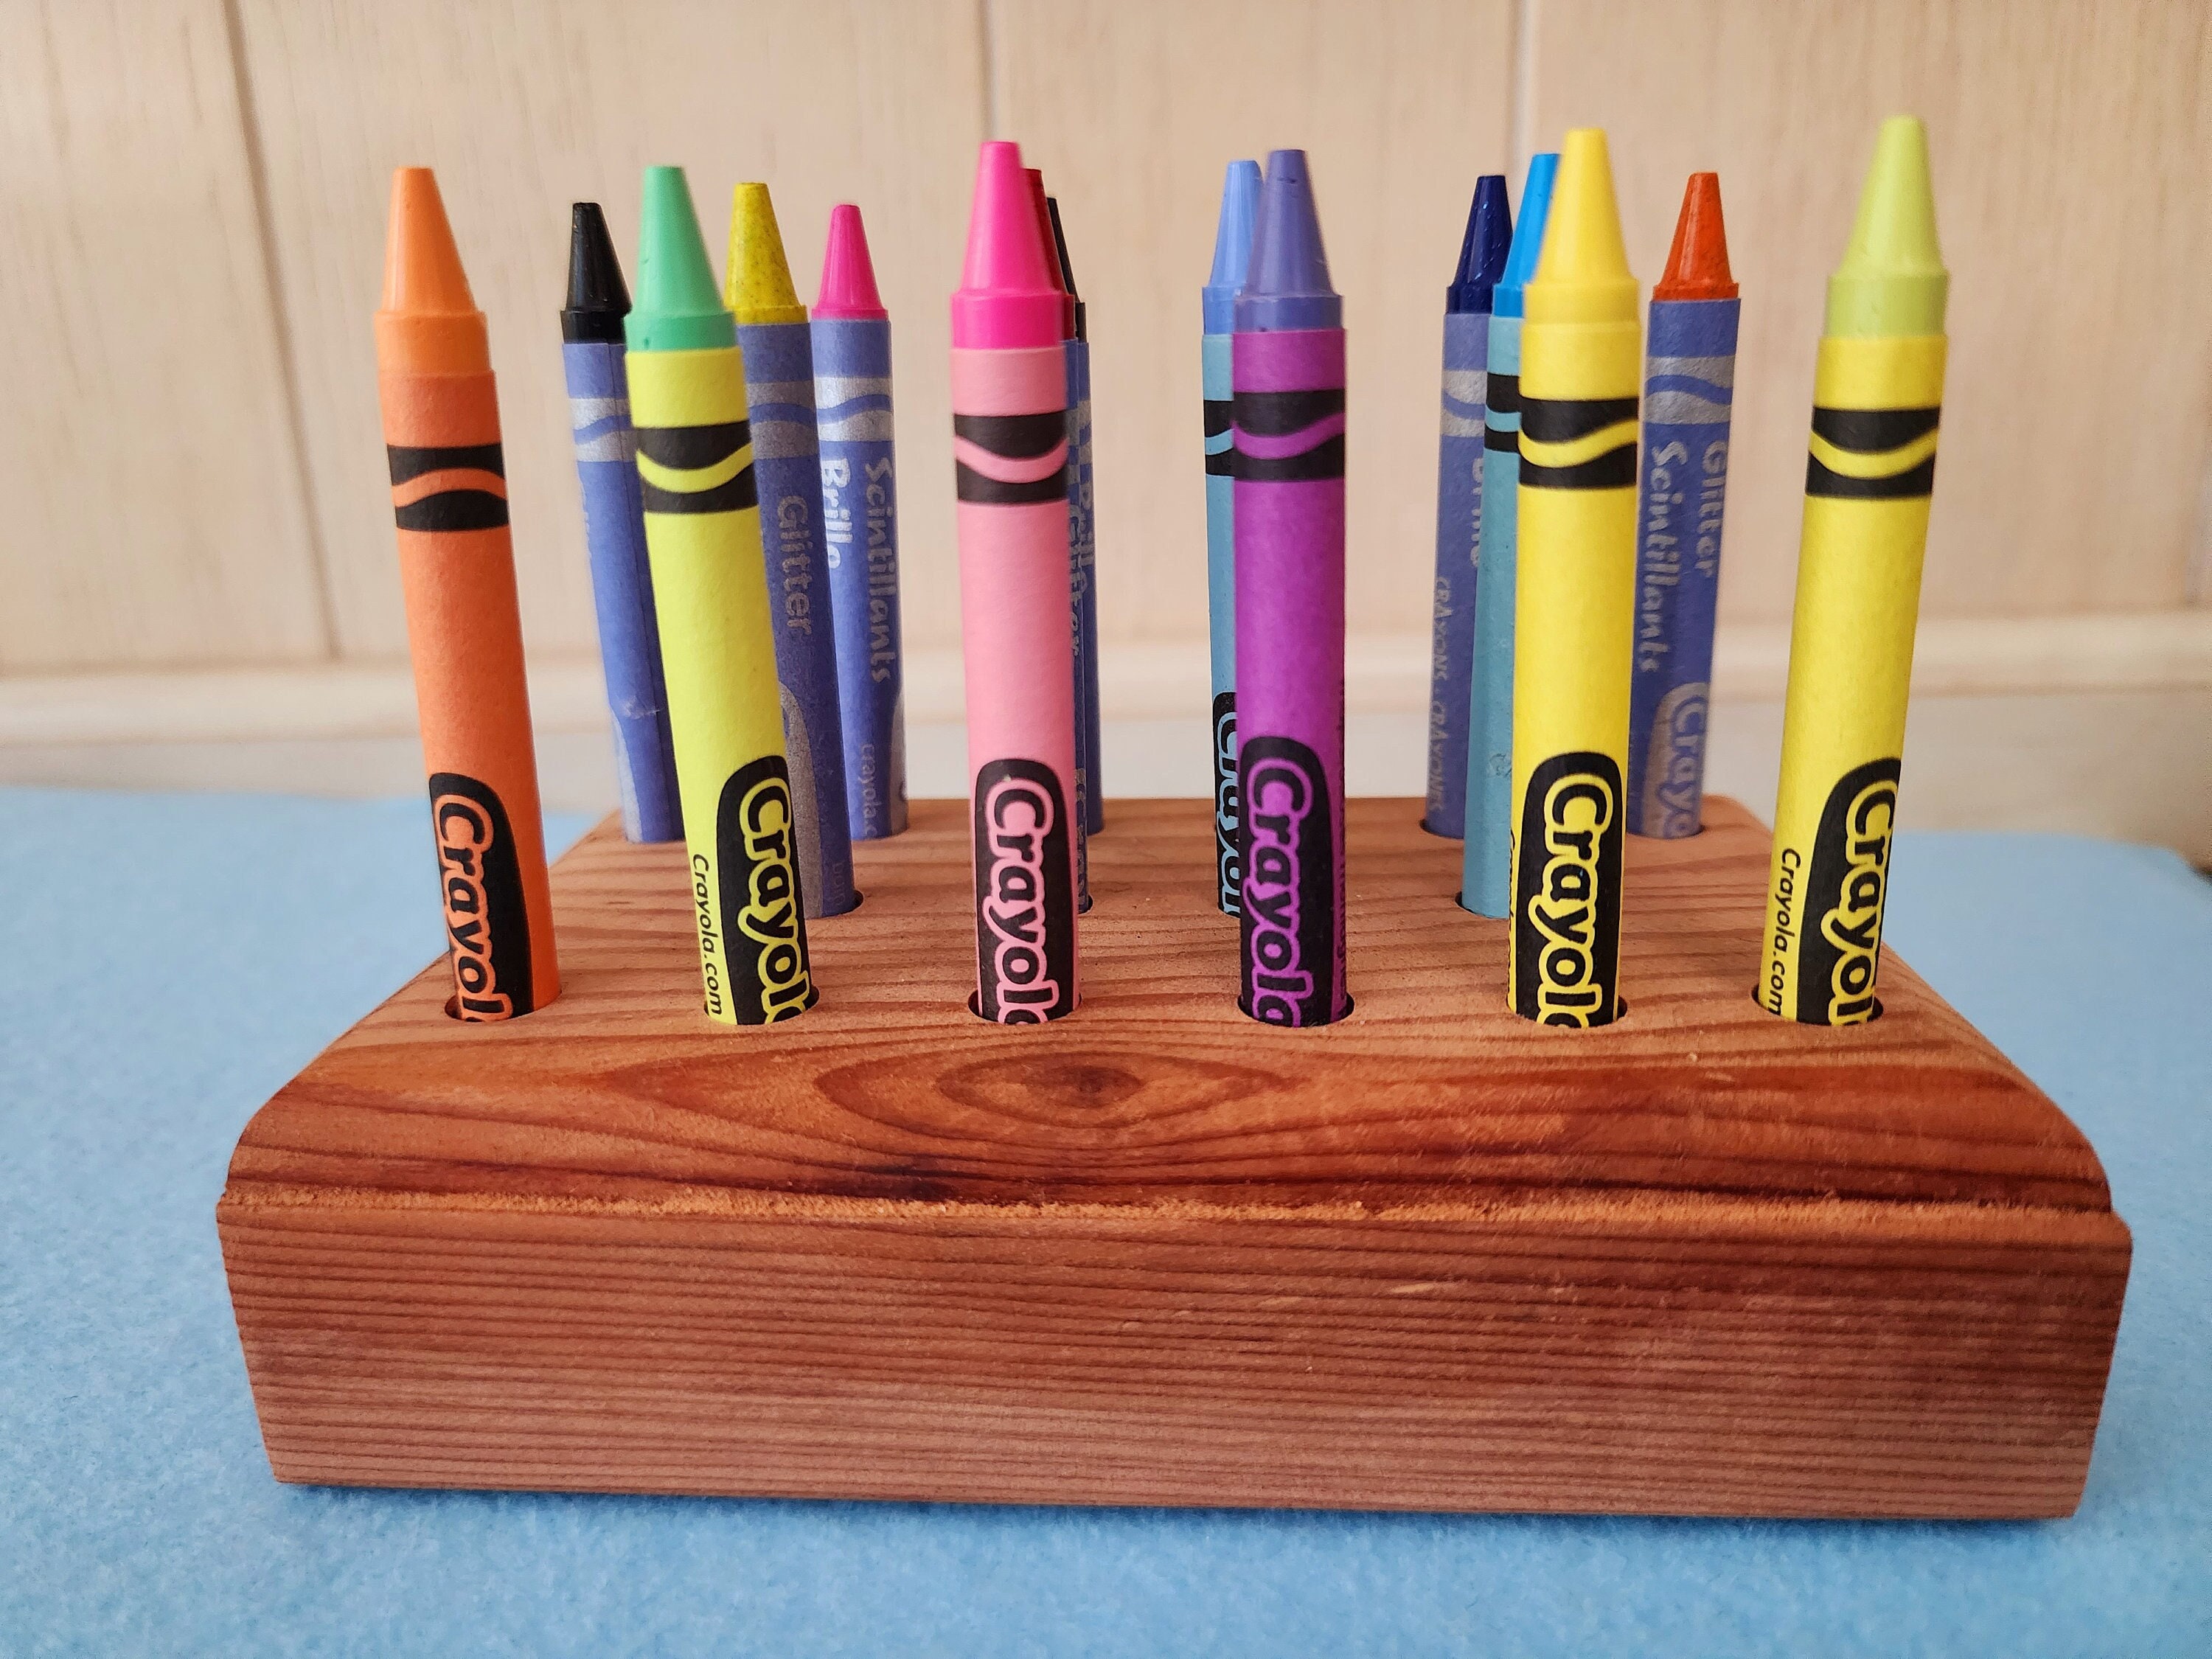  Upper Midland Products Crayon Case- Quality Crayon Holder,  Crayon Organizer, Crayon Storage, Crayon Color Sorter, Crayon Container For  Kids And Adults, Travel Crayons Kit For Kids : Toys & Games